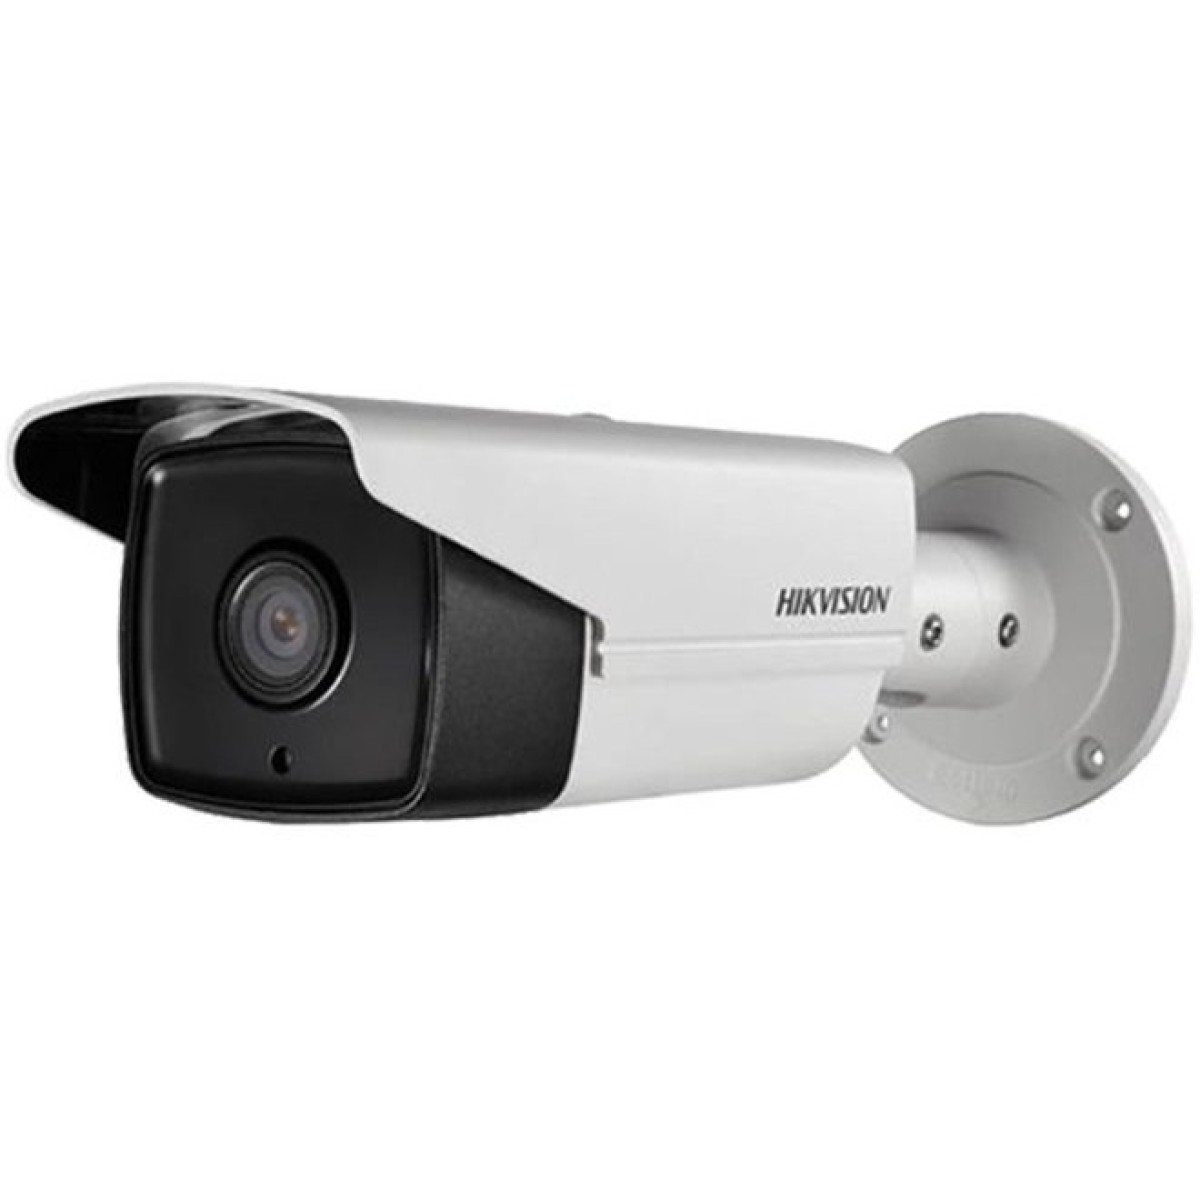 IP-камера Hikvision DS-2CD2T85FWD-I8 (4.0) 256_256.jpg